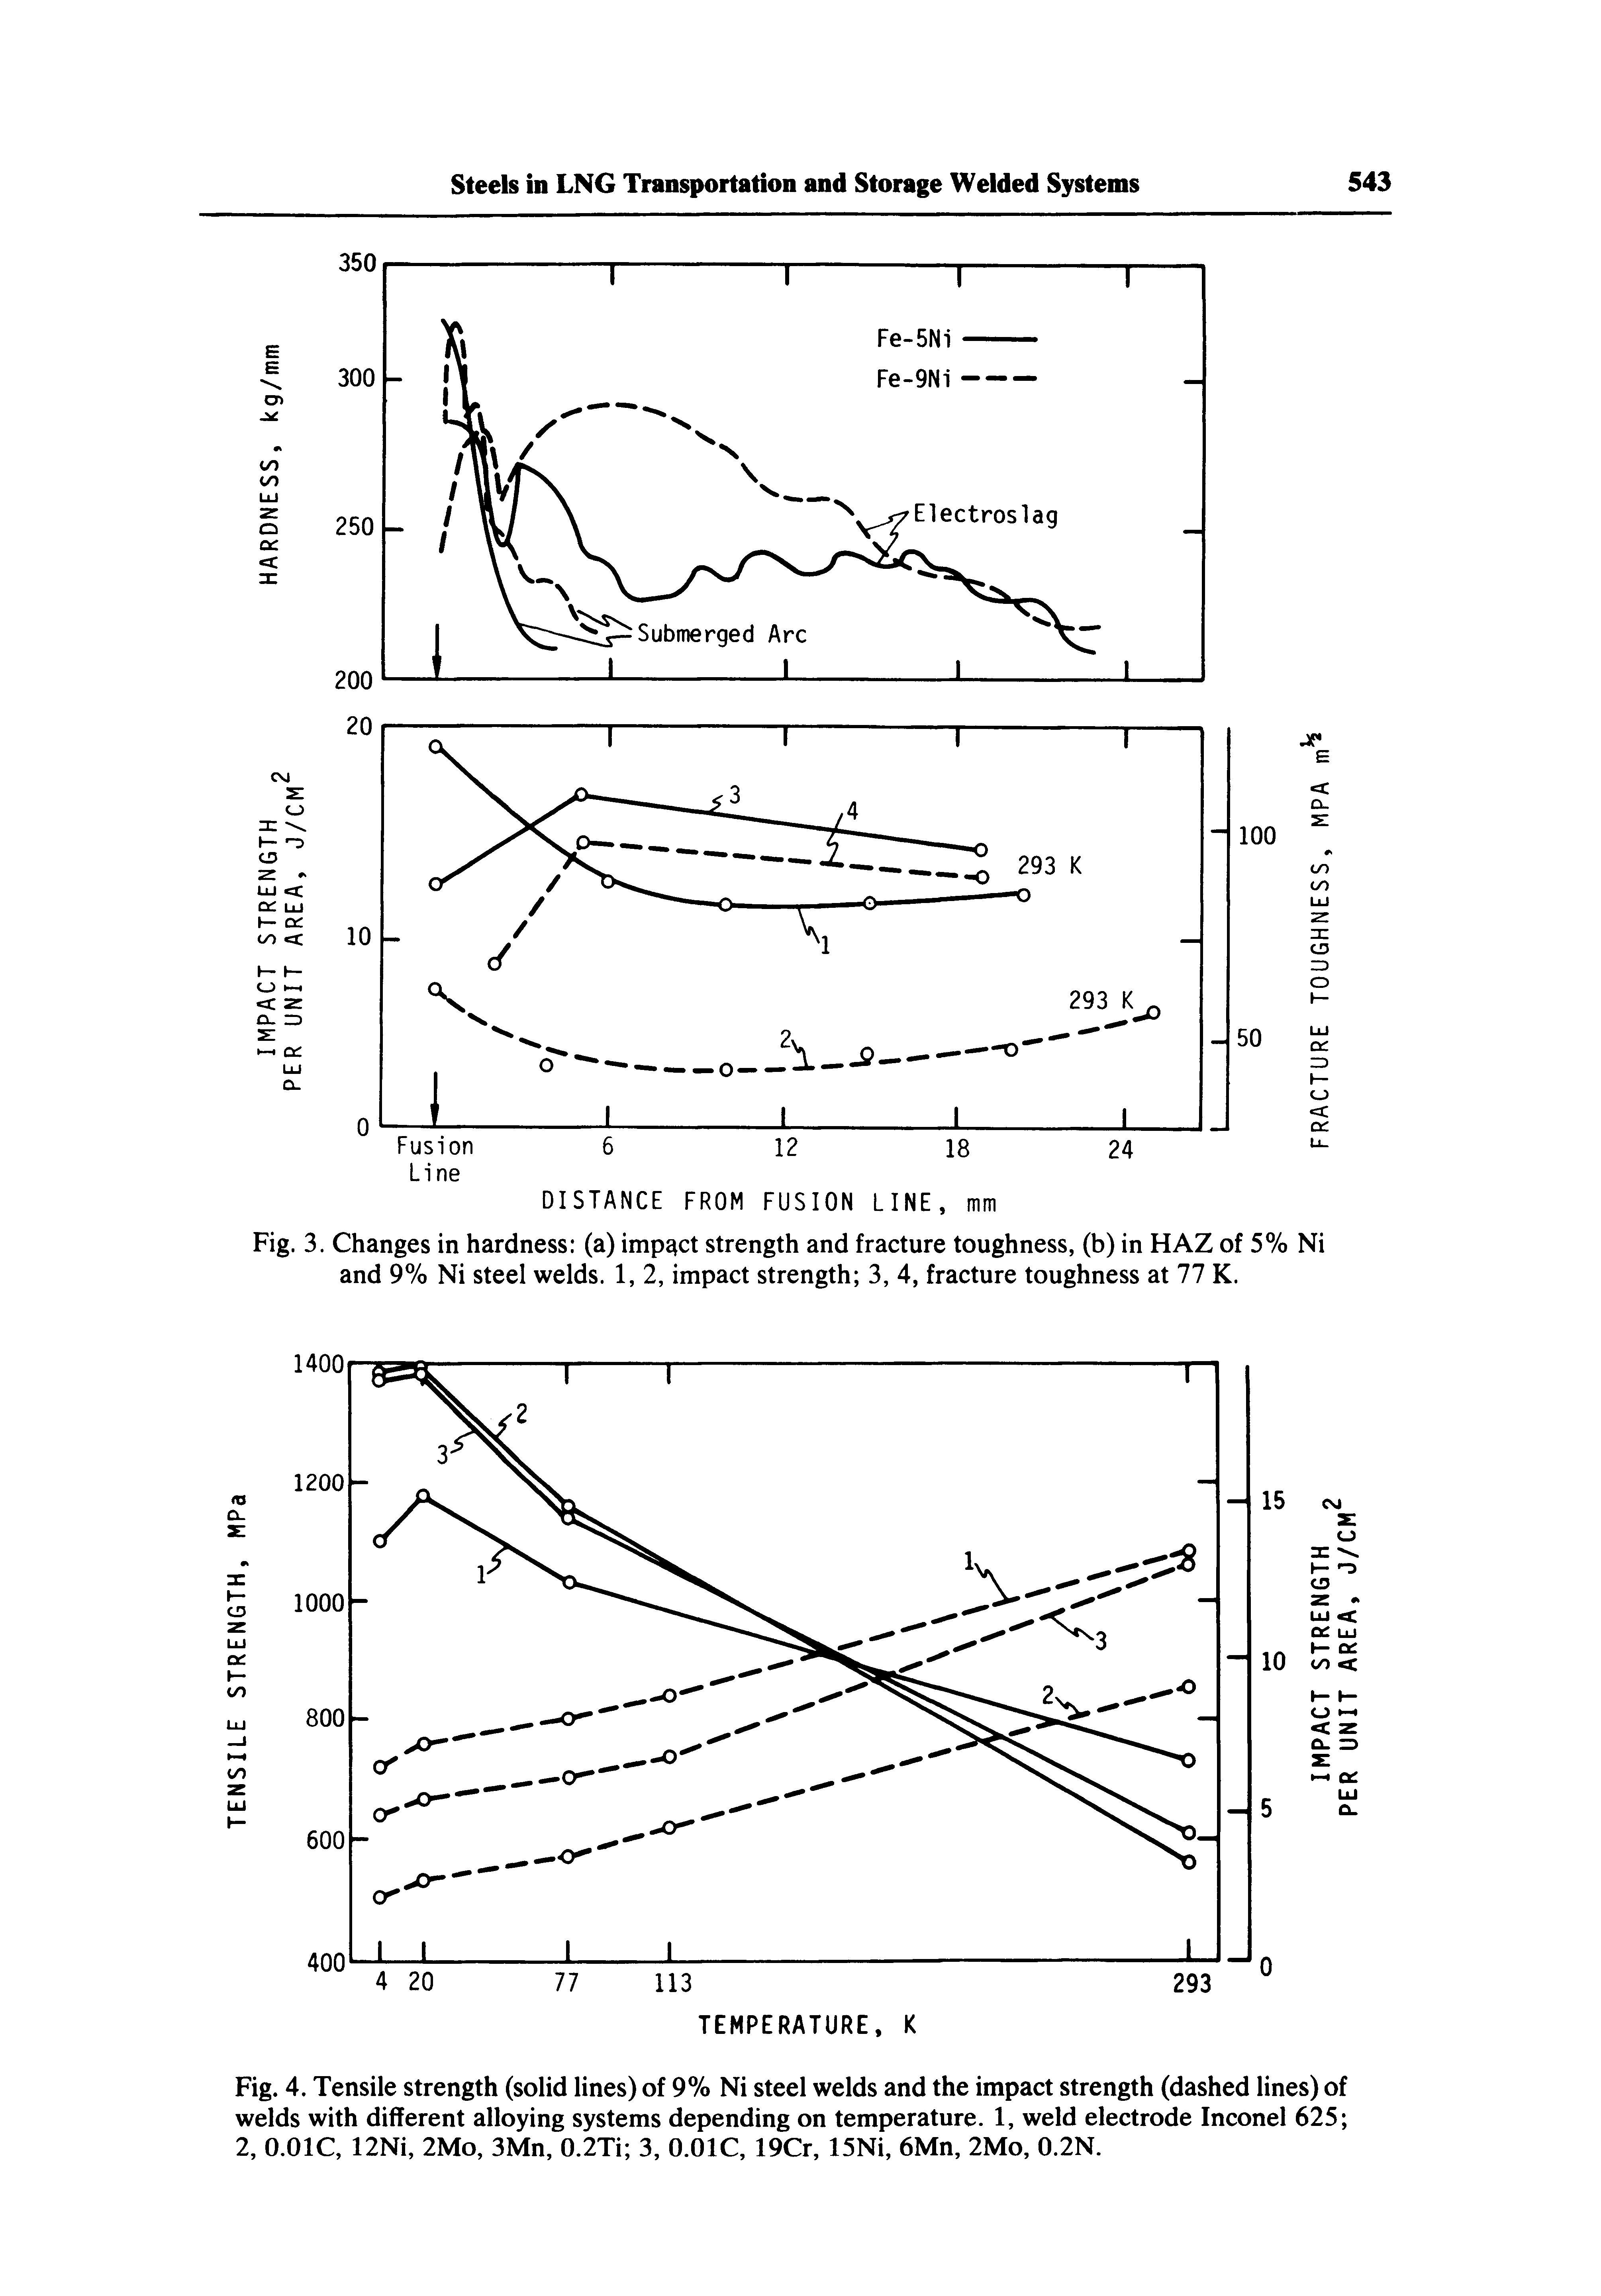 Fig. 4. Tensile strength (solid lines) of 9% Ni steel welds and the impact strength (dashed lines) of welds with different alloying systems depending on temperature. 1, weld electrode Inconel 625 2, O.OIC, 12Ni, 2Mo, 3Mn, 0.2Ti 3, O.OIC, 19Cr, 15Ni, 6Mn, 2Mo, 0.2N.